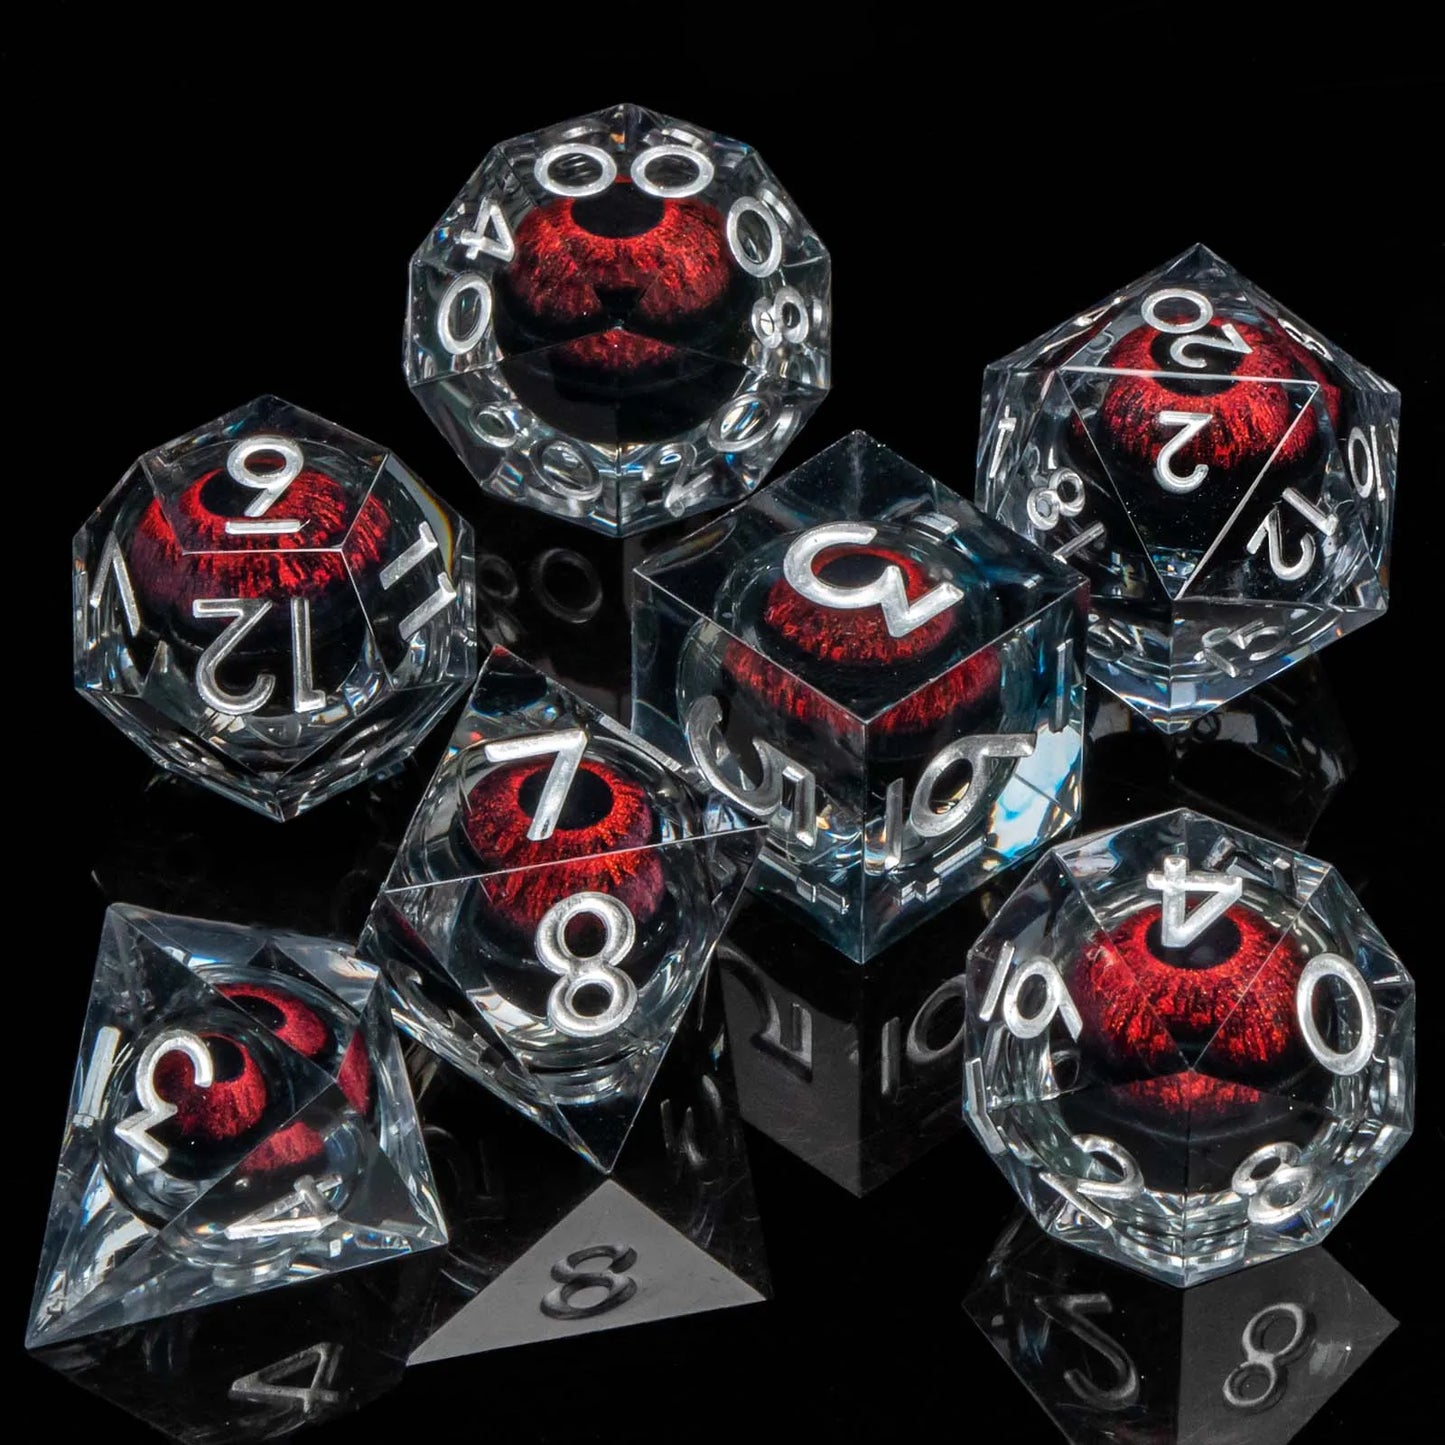 D and D Flowing Sand Sharp Edge Dragon Eye Dnd Resin RPG Polyhedral D&D Dice Set For Dungeon and Dragon Pathfinder Role Playing AZ04